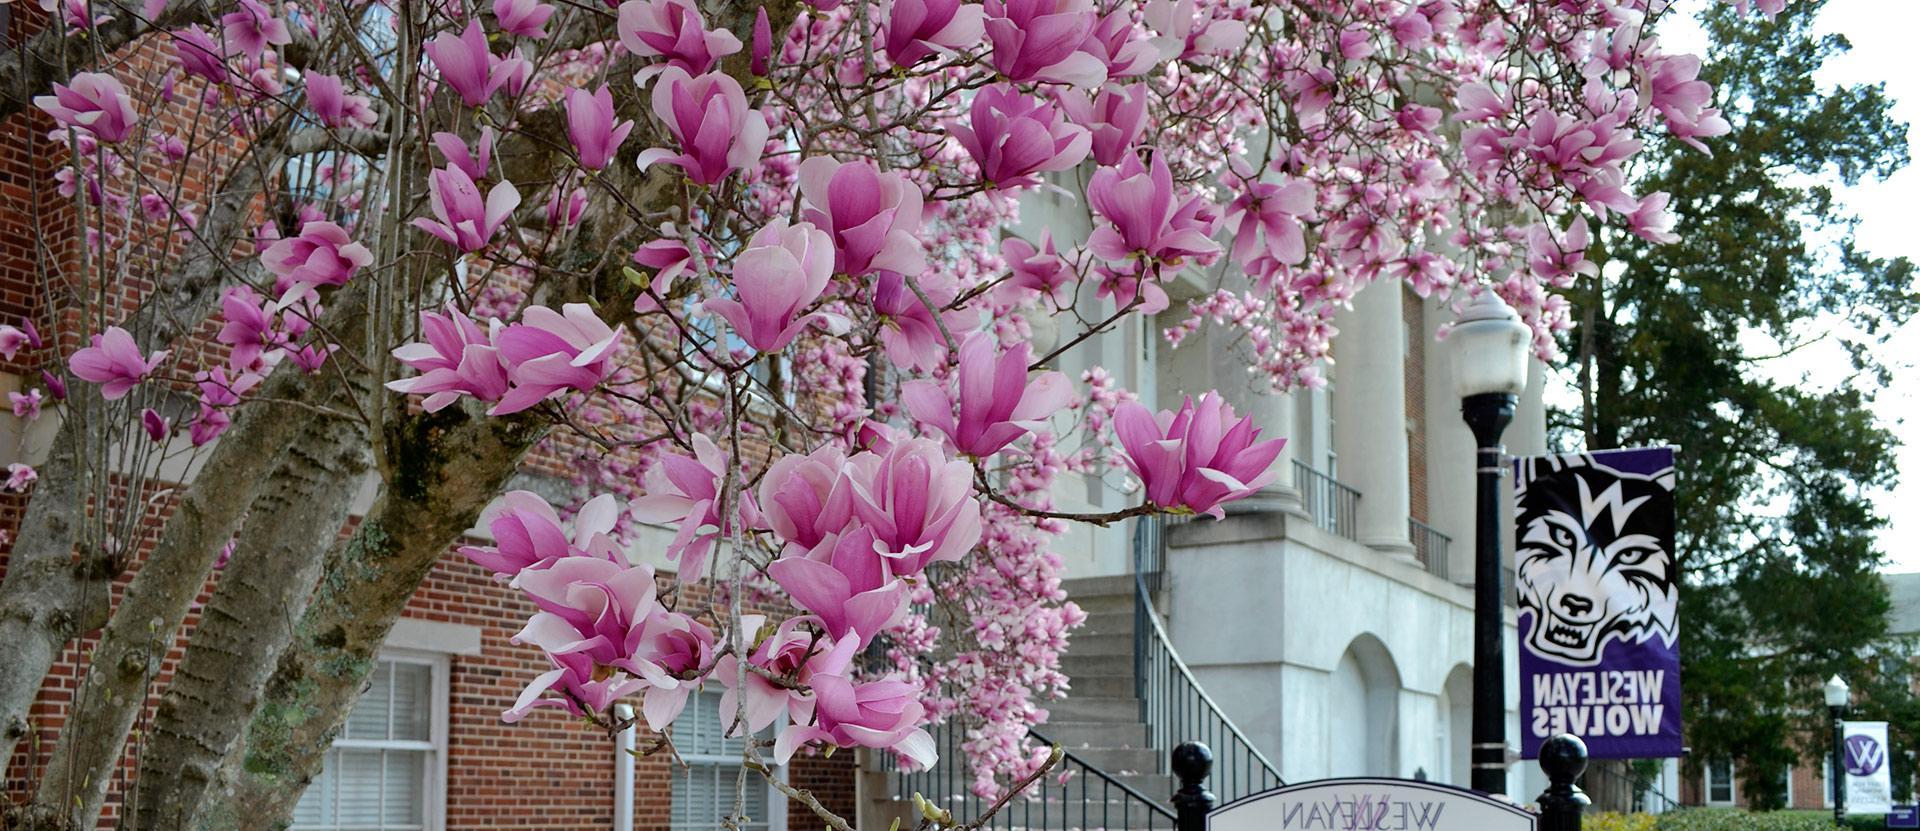 Tulip tree with pink blooms in foreground with Candler building in background.